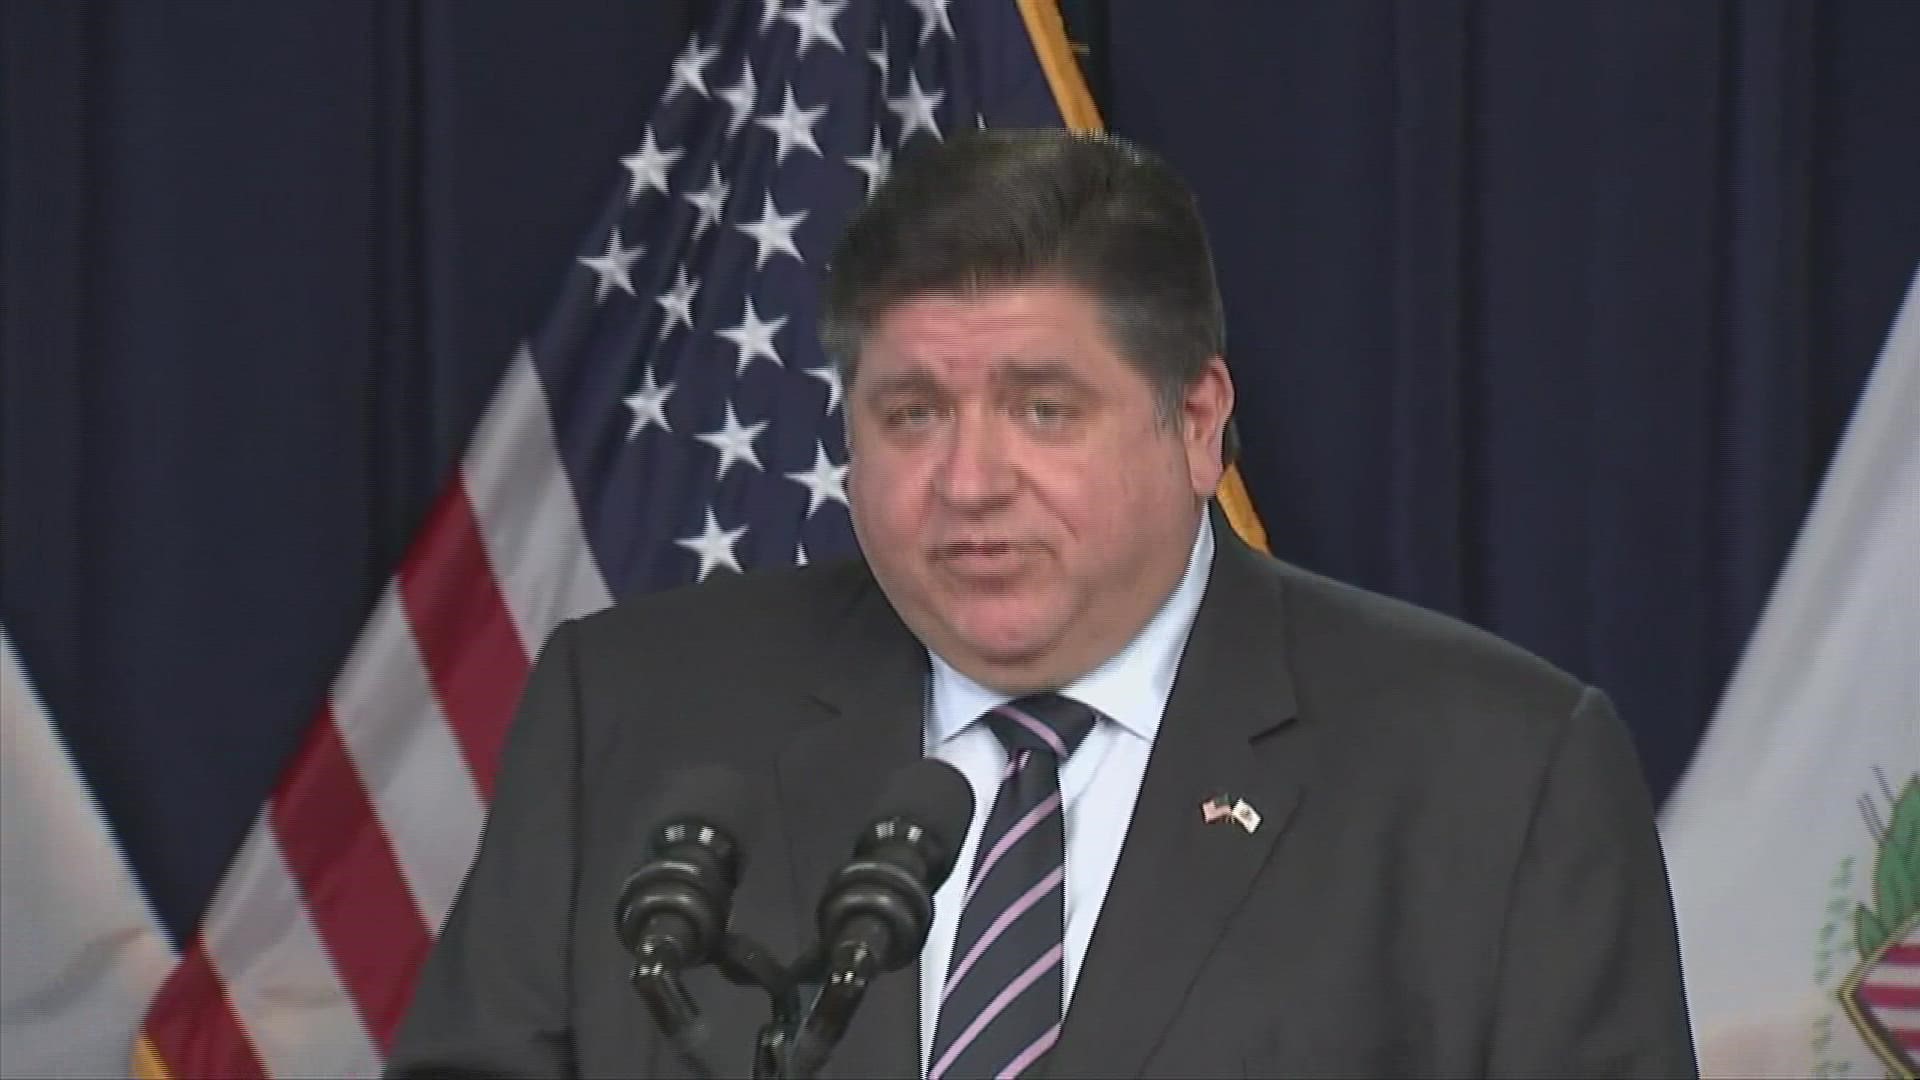 Gov. Pritzker gives an update Monday, Jan. 3 on the latest COVID-19 surge.